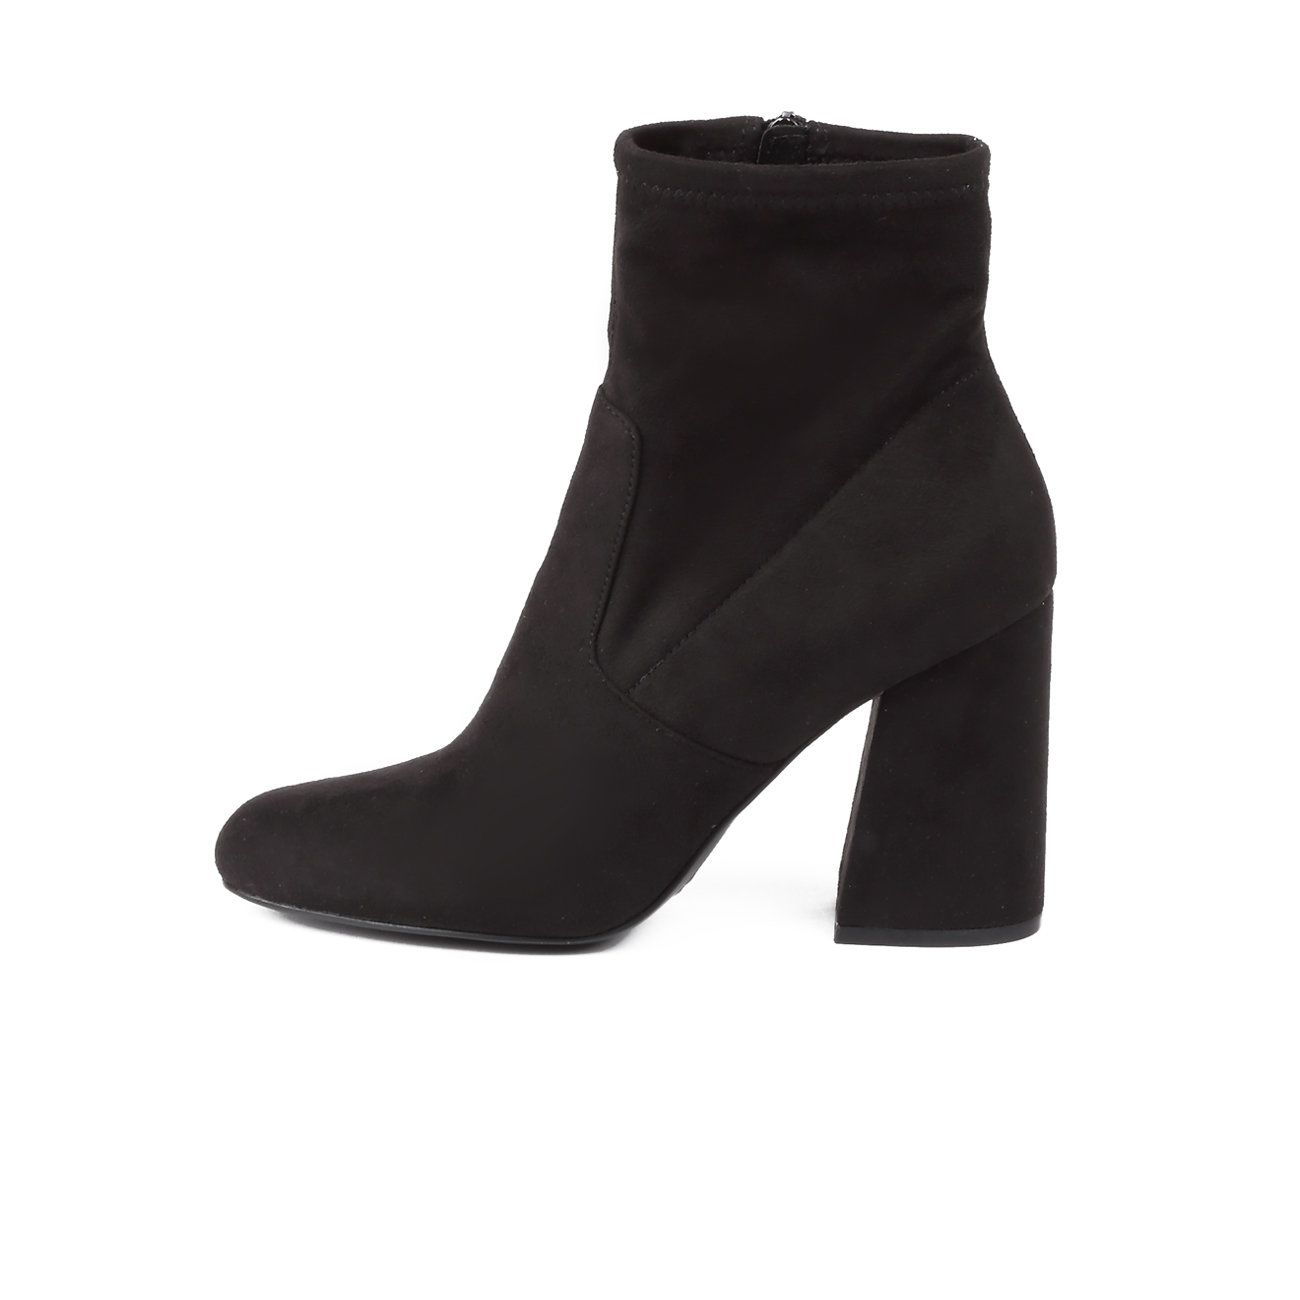 STEVE MADDEN SUEDE ANKLE BOOTS FLARED HEEL Woman Black | Mascheroni Store